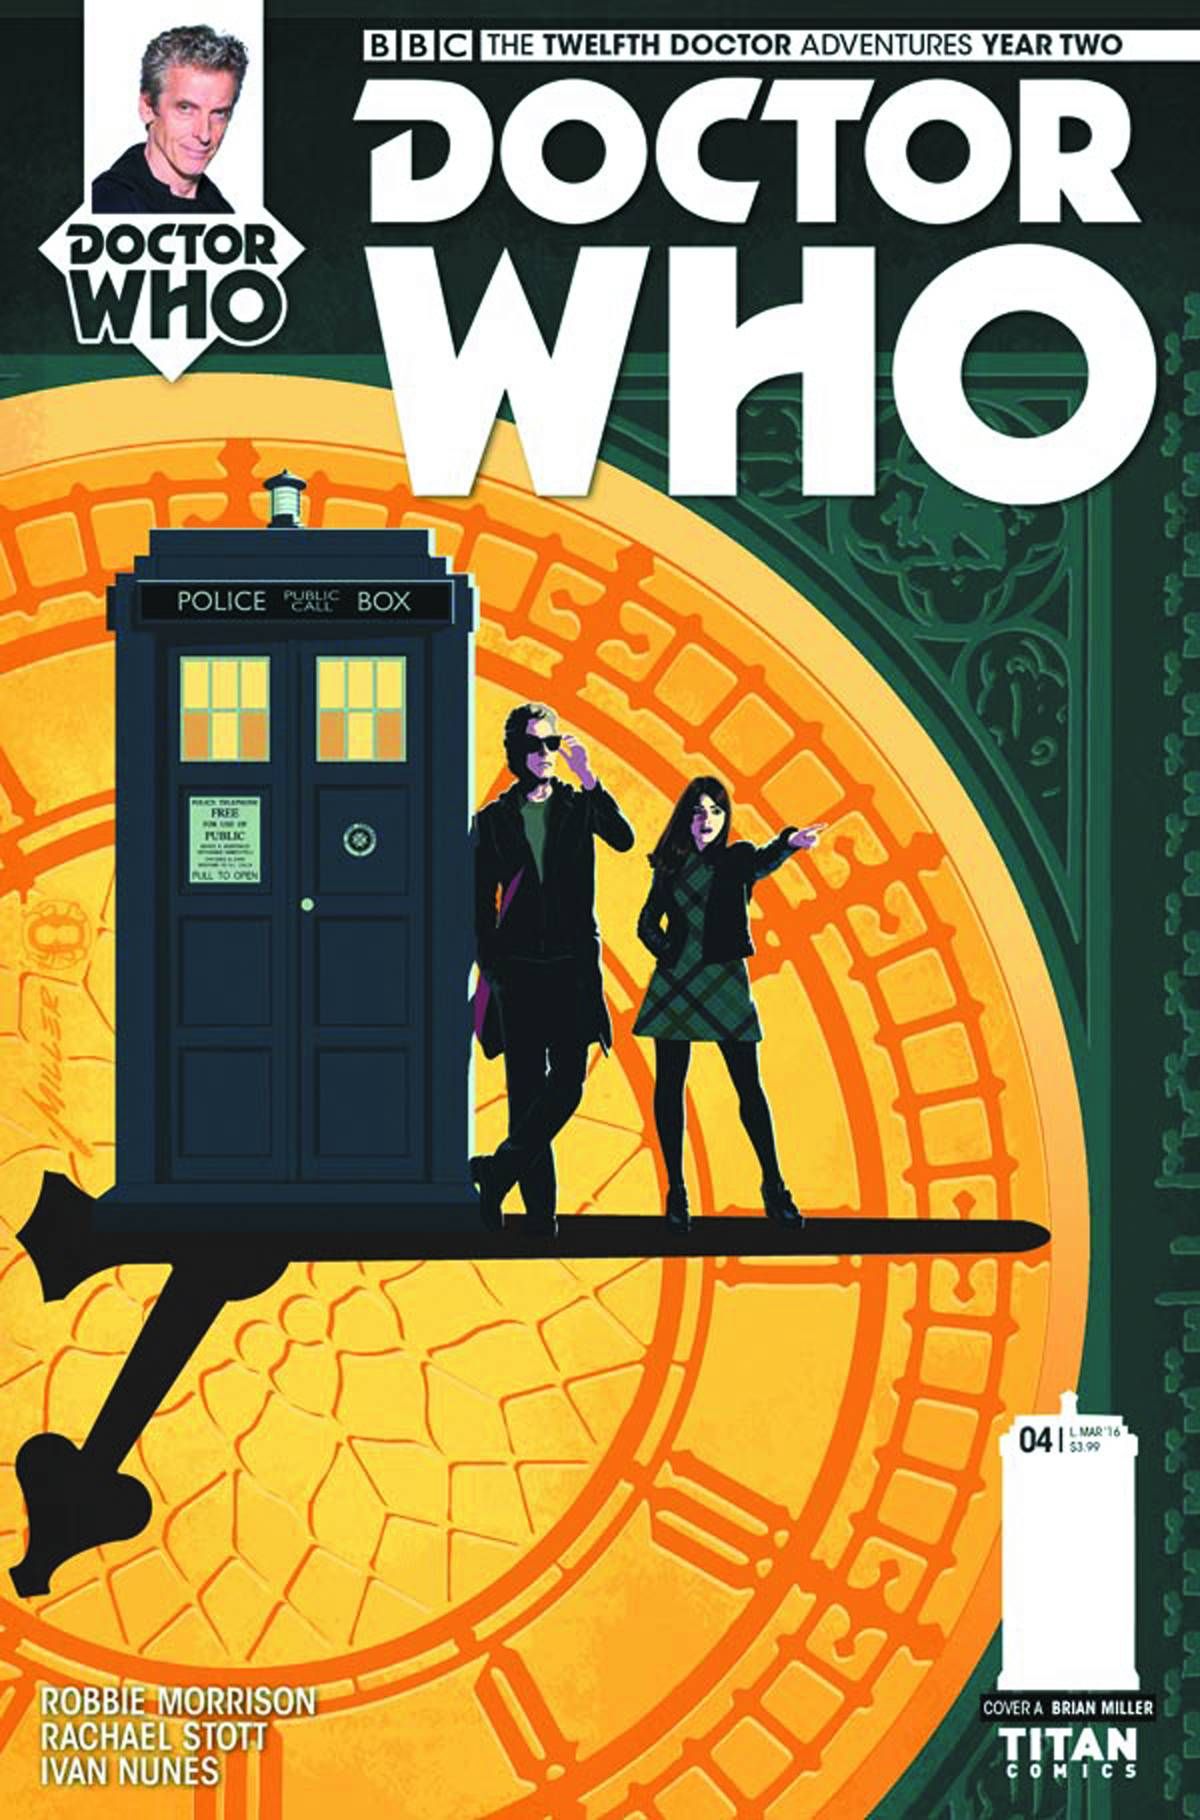 Doctor who: The Twelfth Doctor Year Two #4 Comic